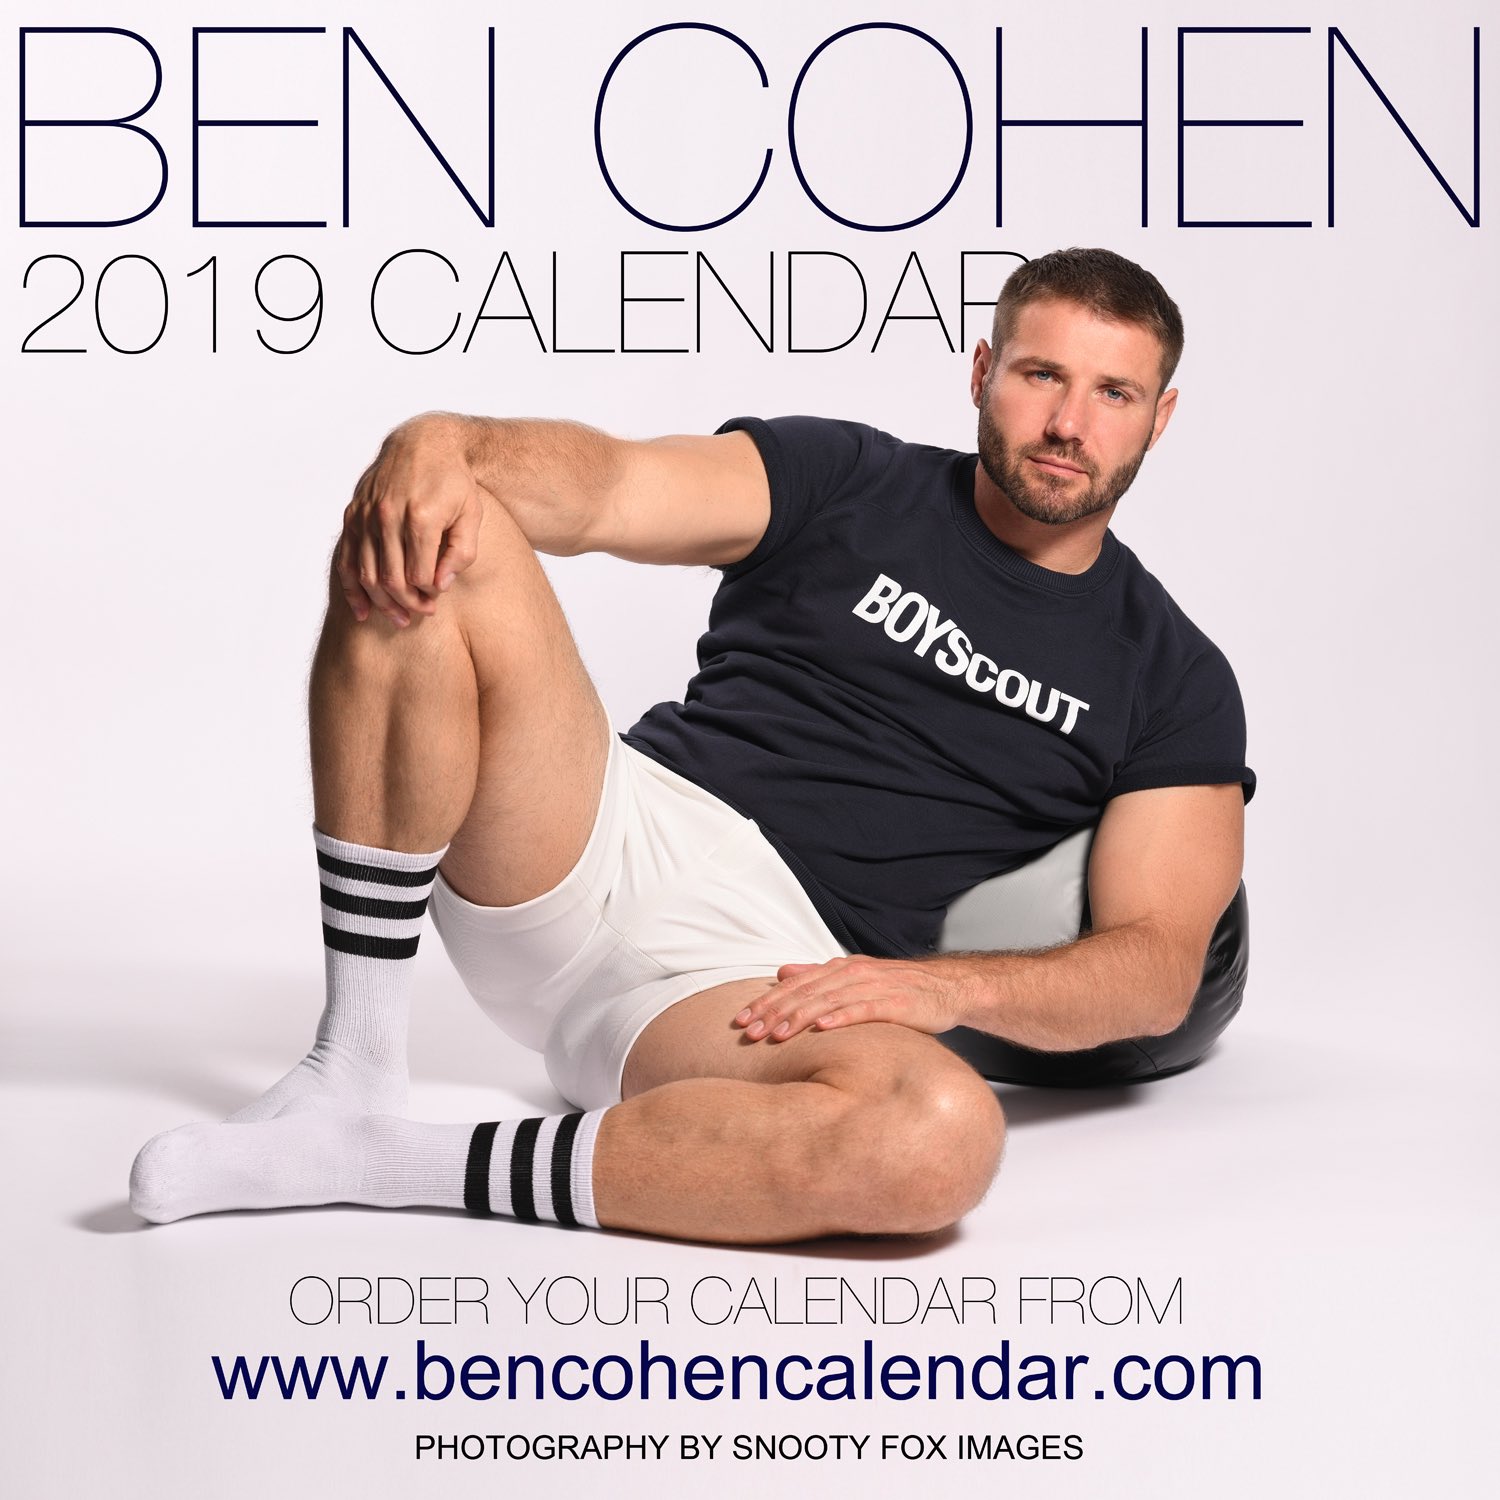 Ben Cohen On Twitter Hey Guys Order My 2019 Calendar Is Now For Sale Limited Edition Of A 1000 To Buy Click On This Link Https T Co Wbx3oh9i75 Https T Co 0mnkizi6uk